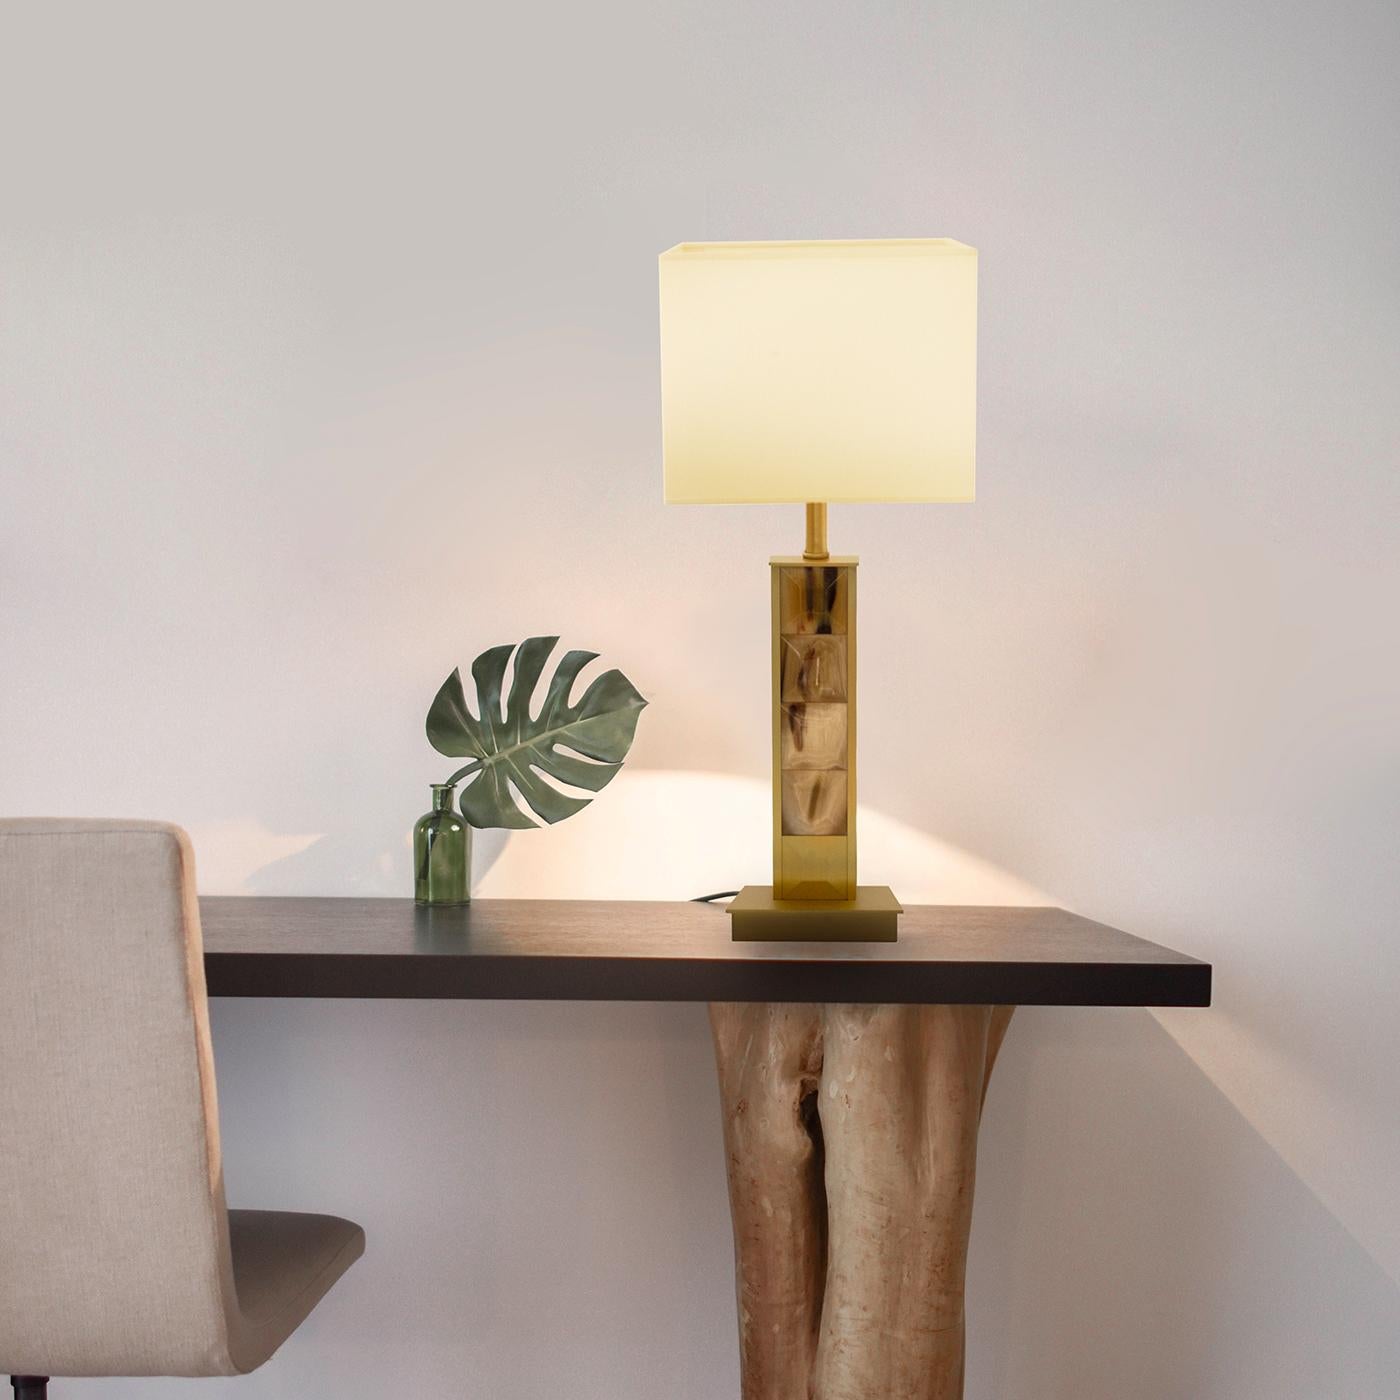 Italian Square Horn Table Lamp by Zanchi 1952